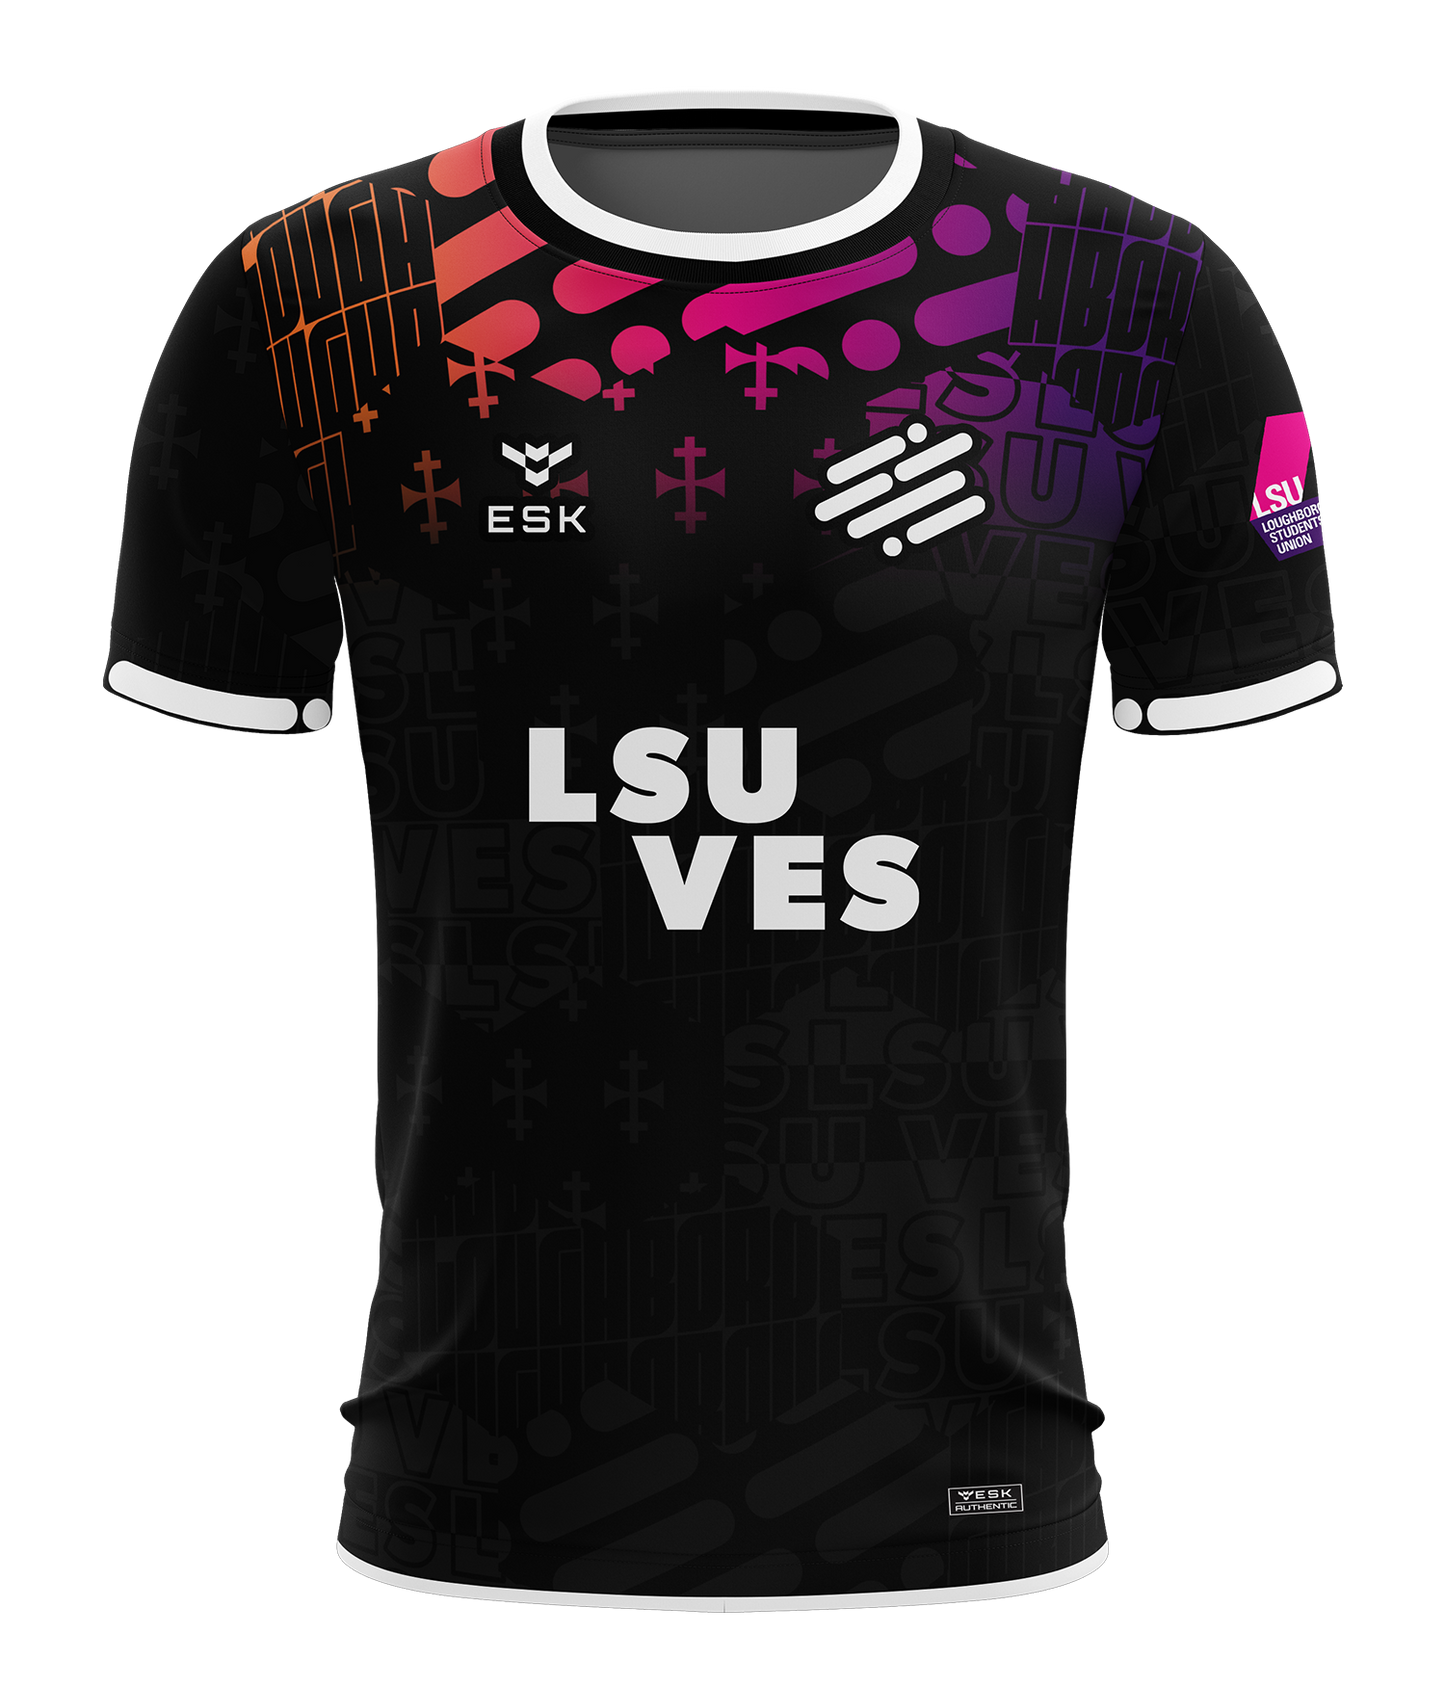 LSUVES Away Esports Jersey